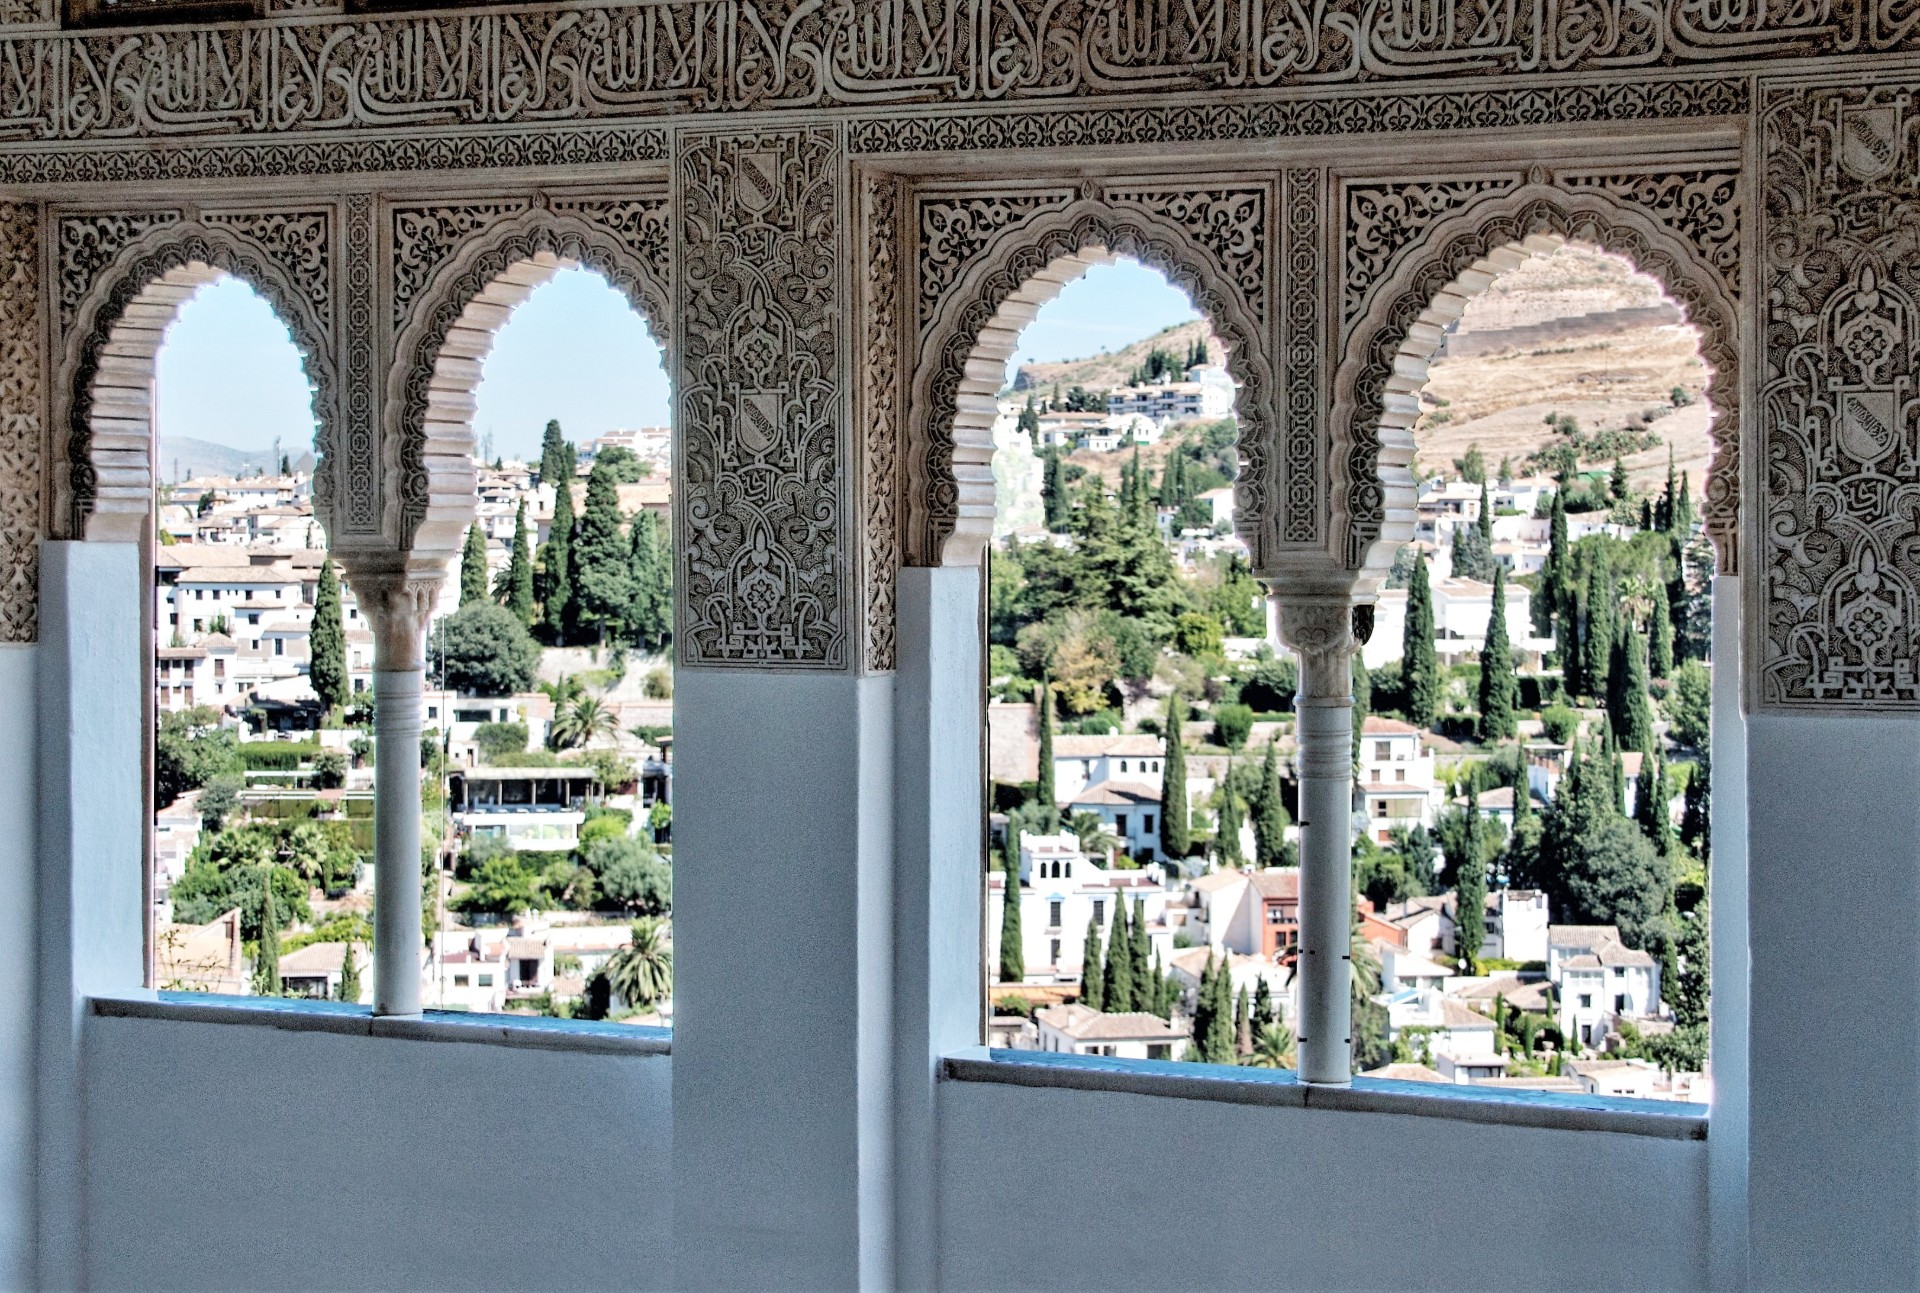 Visit the Alhambra with a private guide